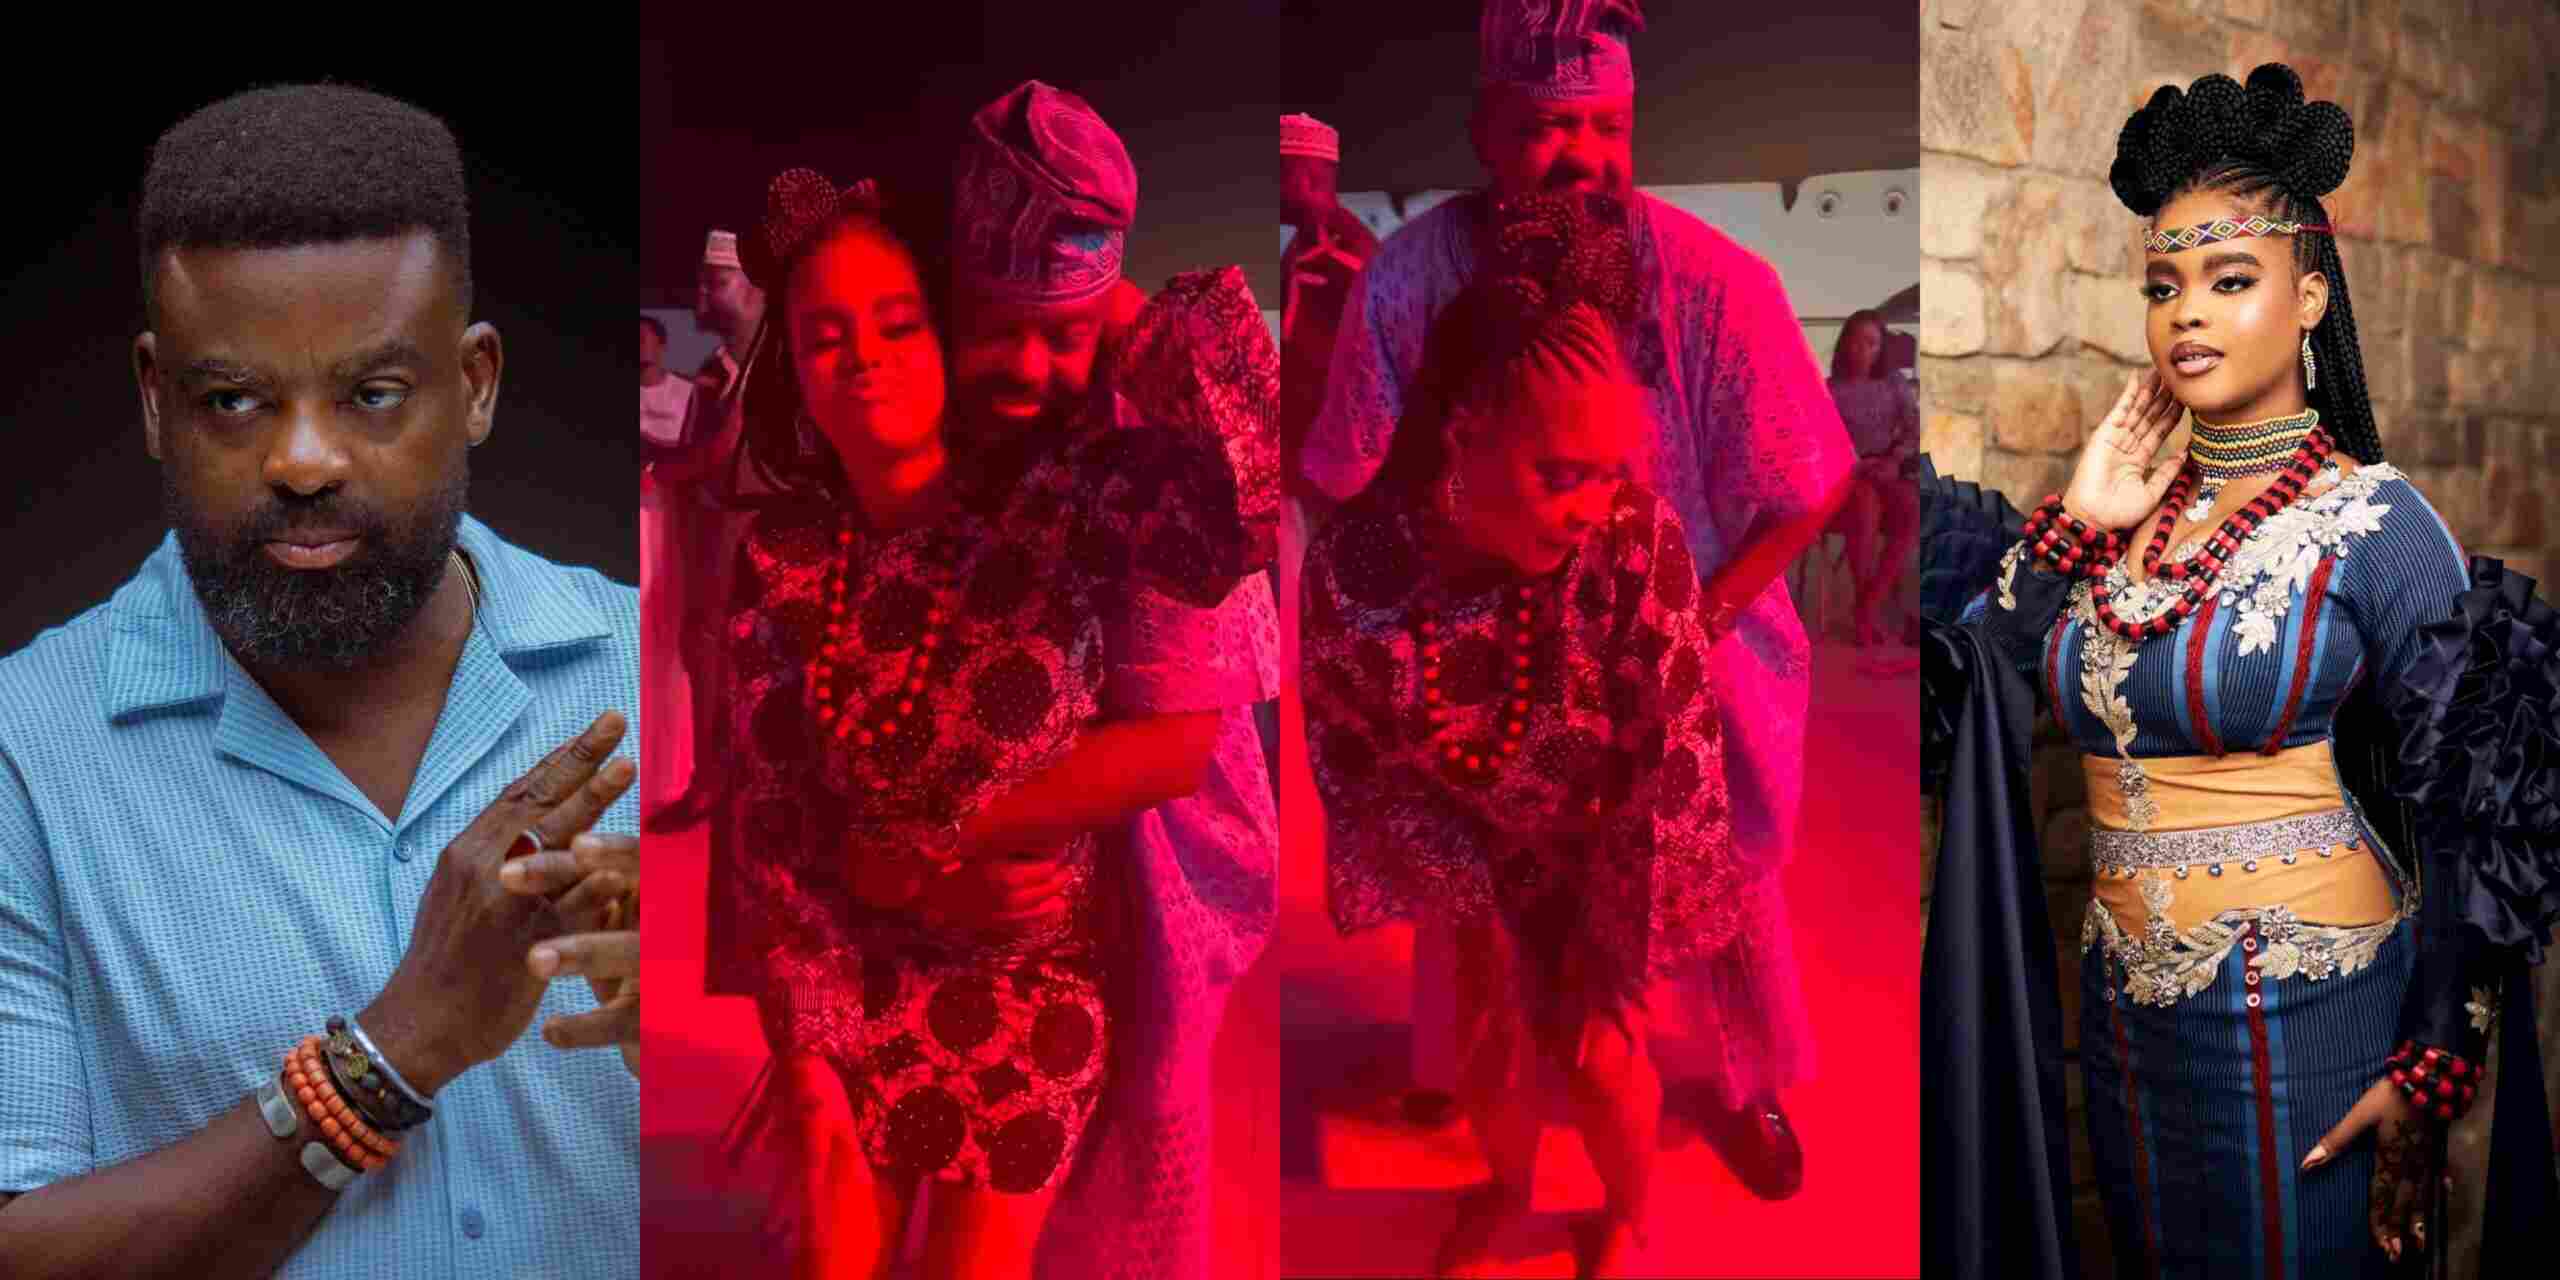 Kunle Afolayan's Dance with Daughter Stirs Debate